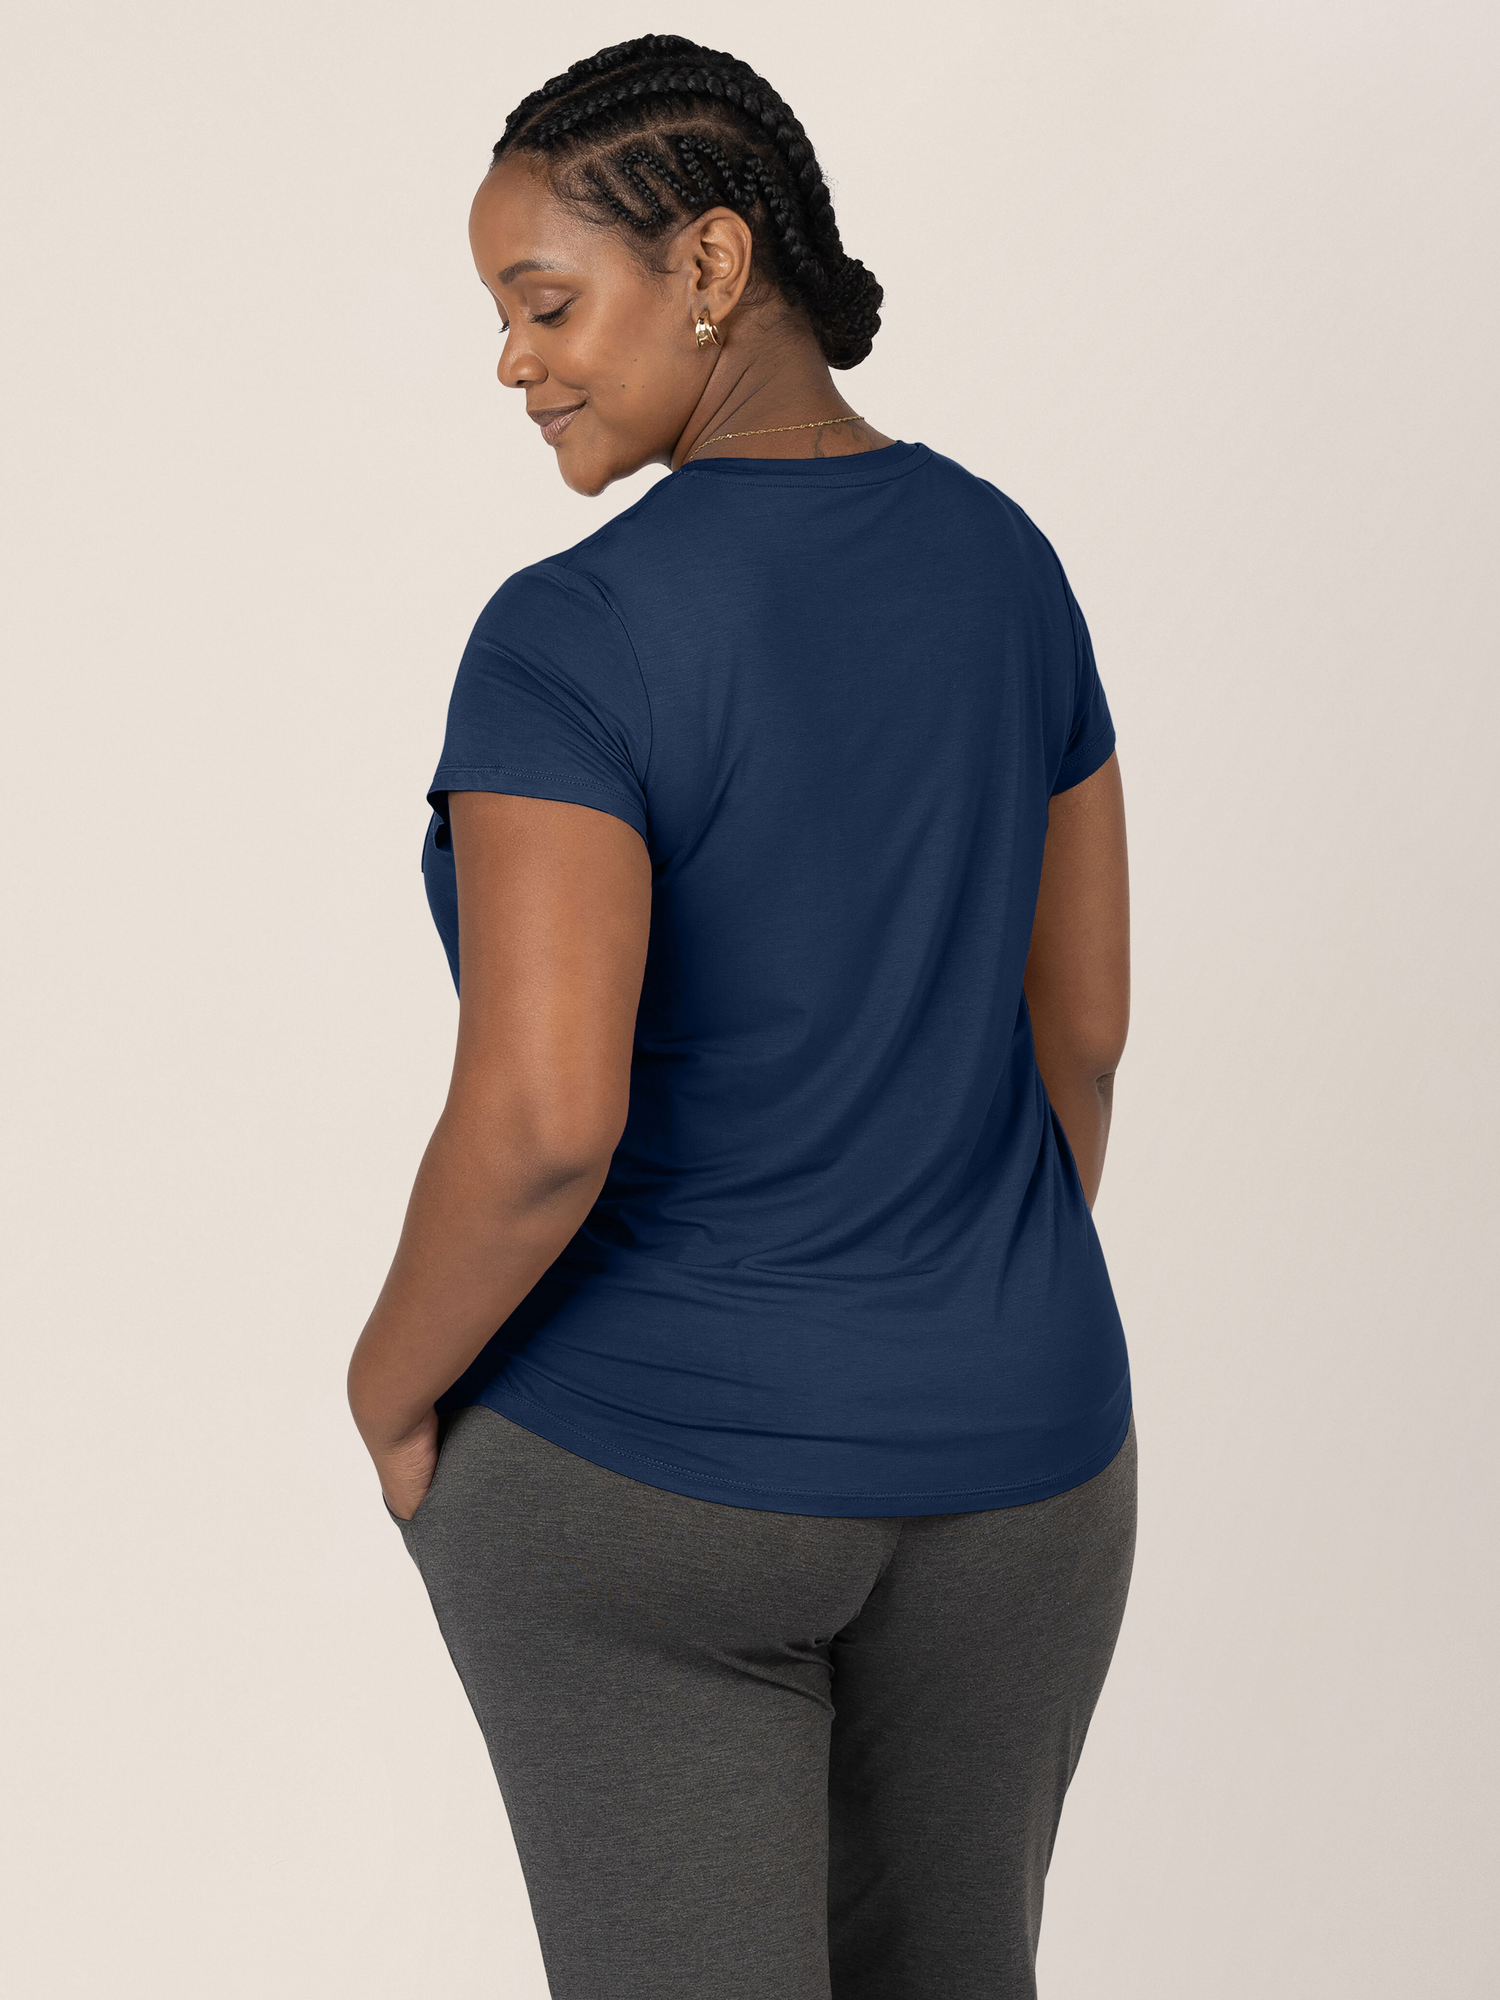 Back of a model wearing the Everyday Maternity & Nursing T-shirt in Navy